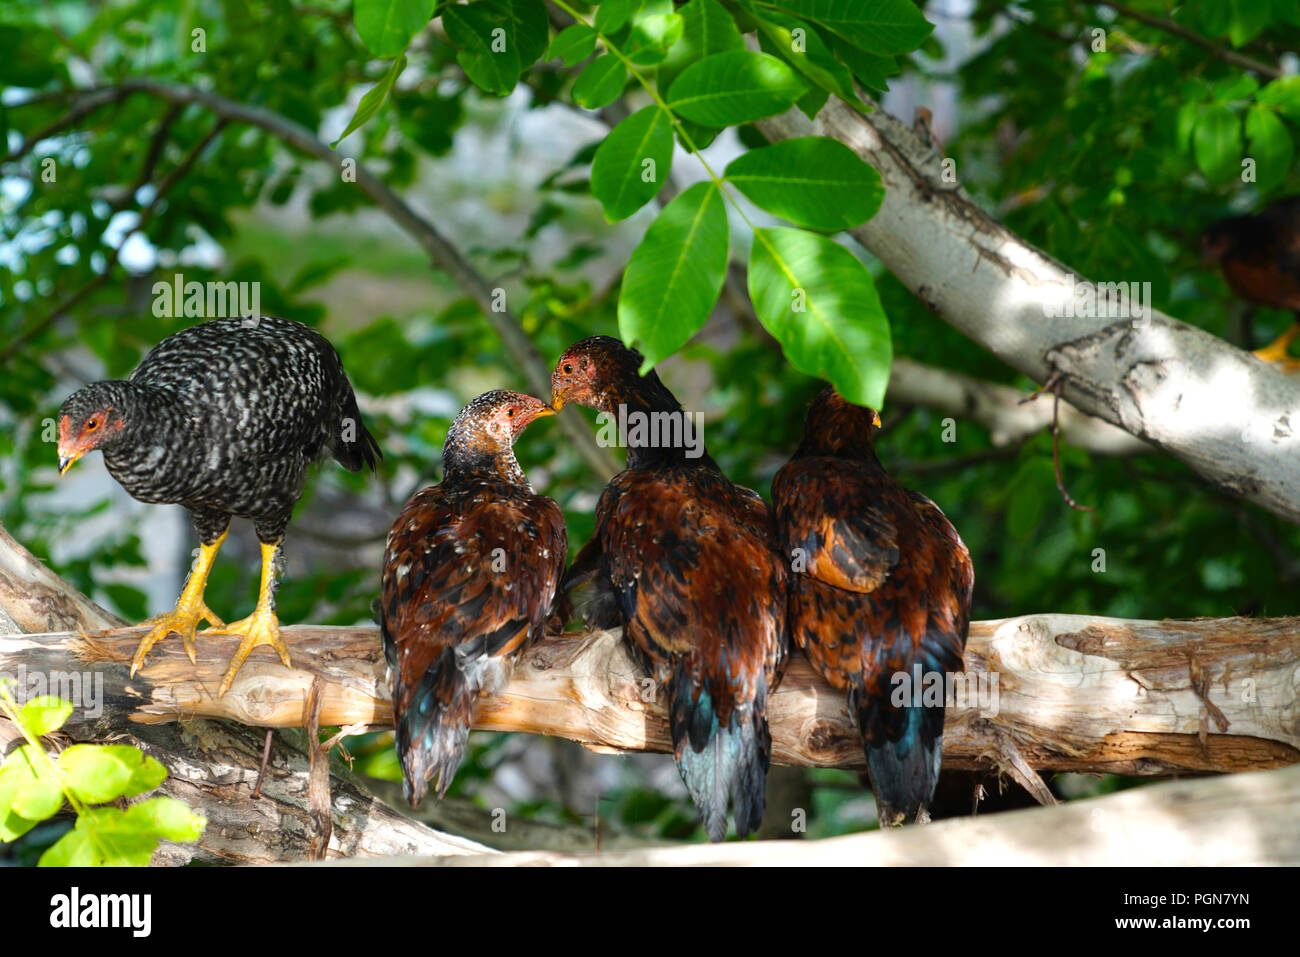 Young free range colorful hens sitting on a tree branch. Concept of kissing in public. Stock Photo